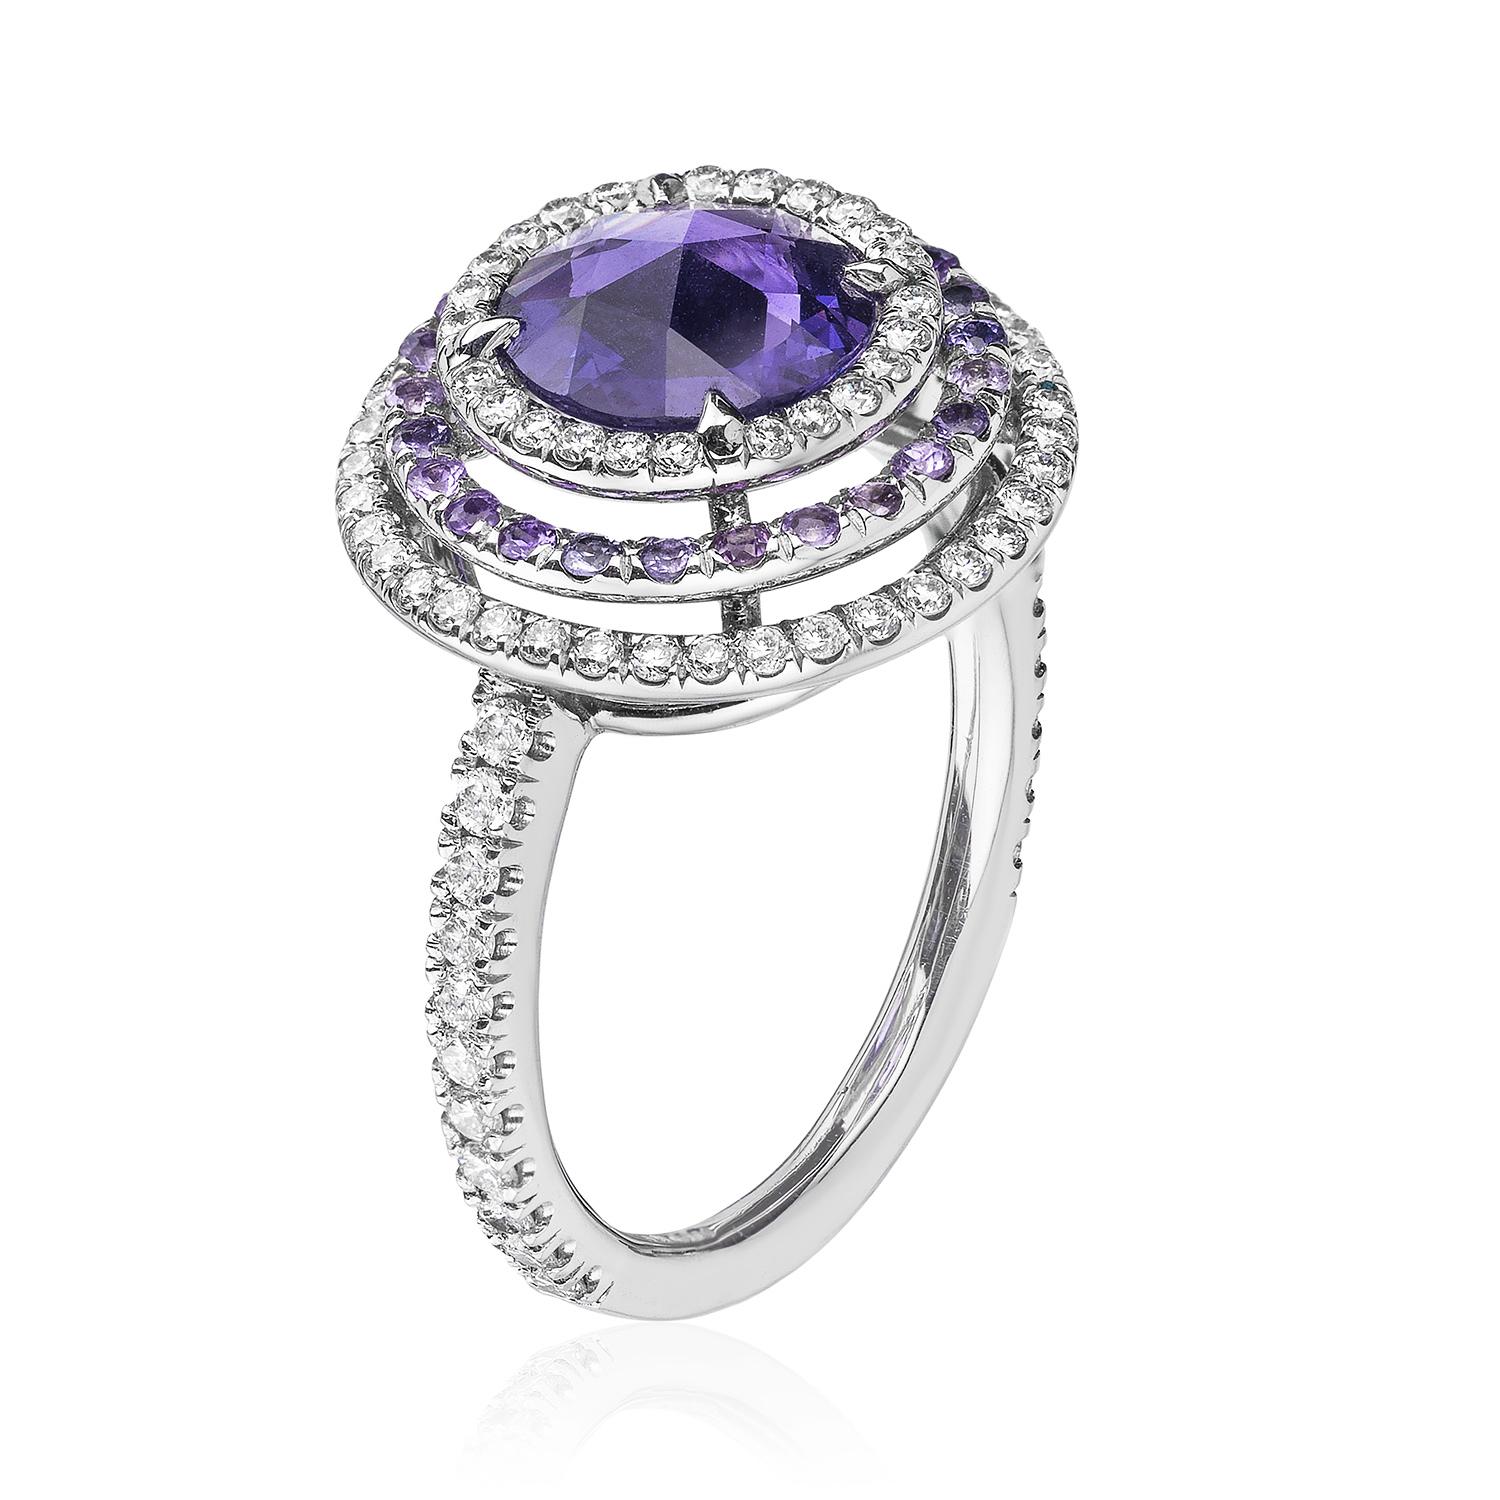 A Platinum ring centered upon a 1.24 carat natural unheated rose-cut purple sapphire, certified by C. Dunaigre Consulting, set within a three row micropavé surround consisting of colorless diamonds and natural unheated purple sapphires with